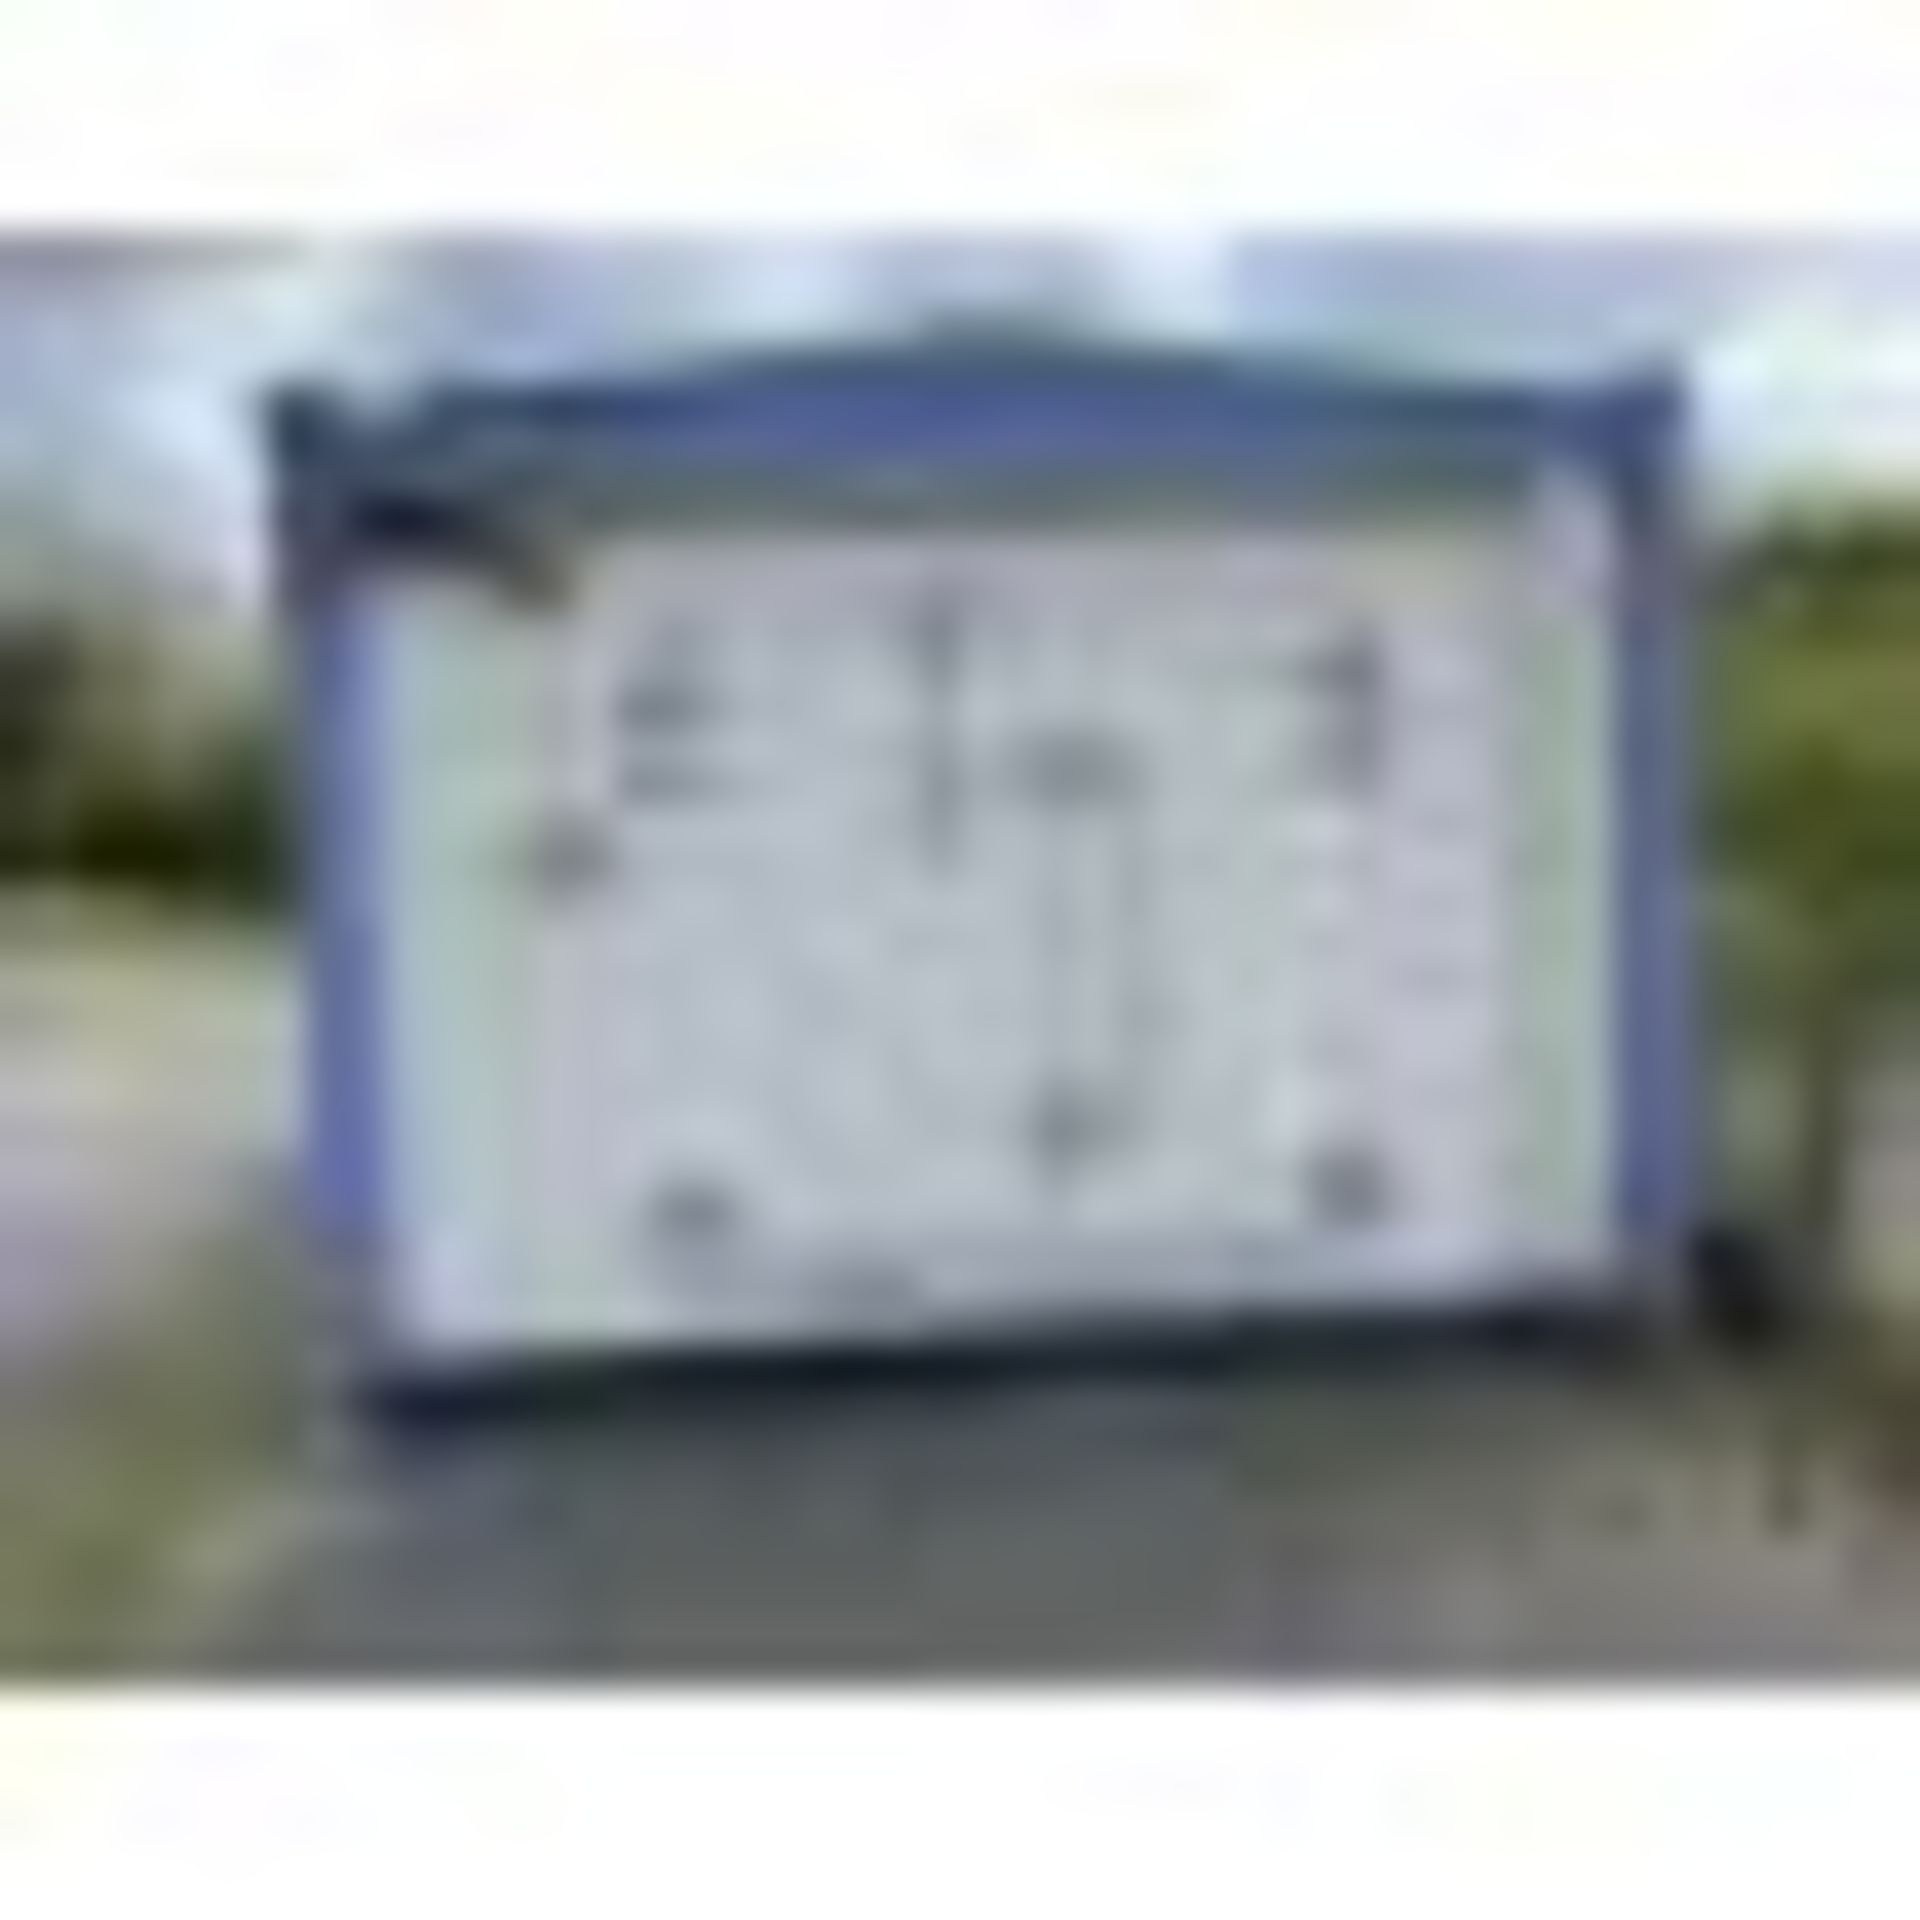 Fridge/ Freezer Container, approx. 6m x 3.8m x 2.7m high (purchaser's responsibility to dismantle - Image 7 of 7